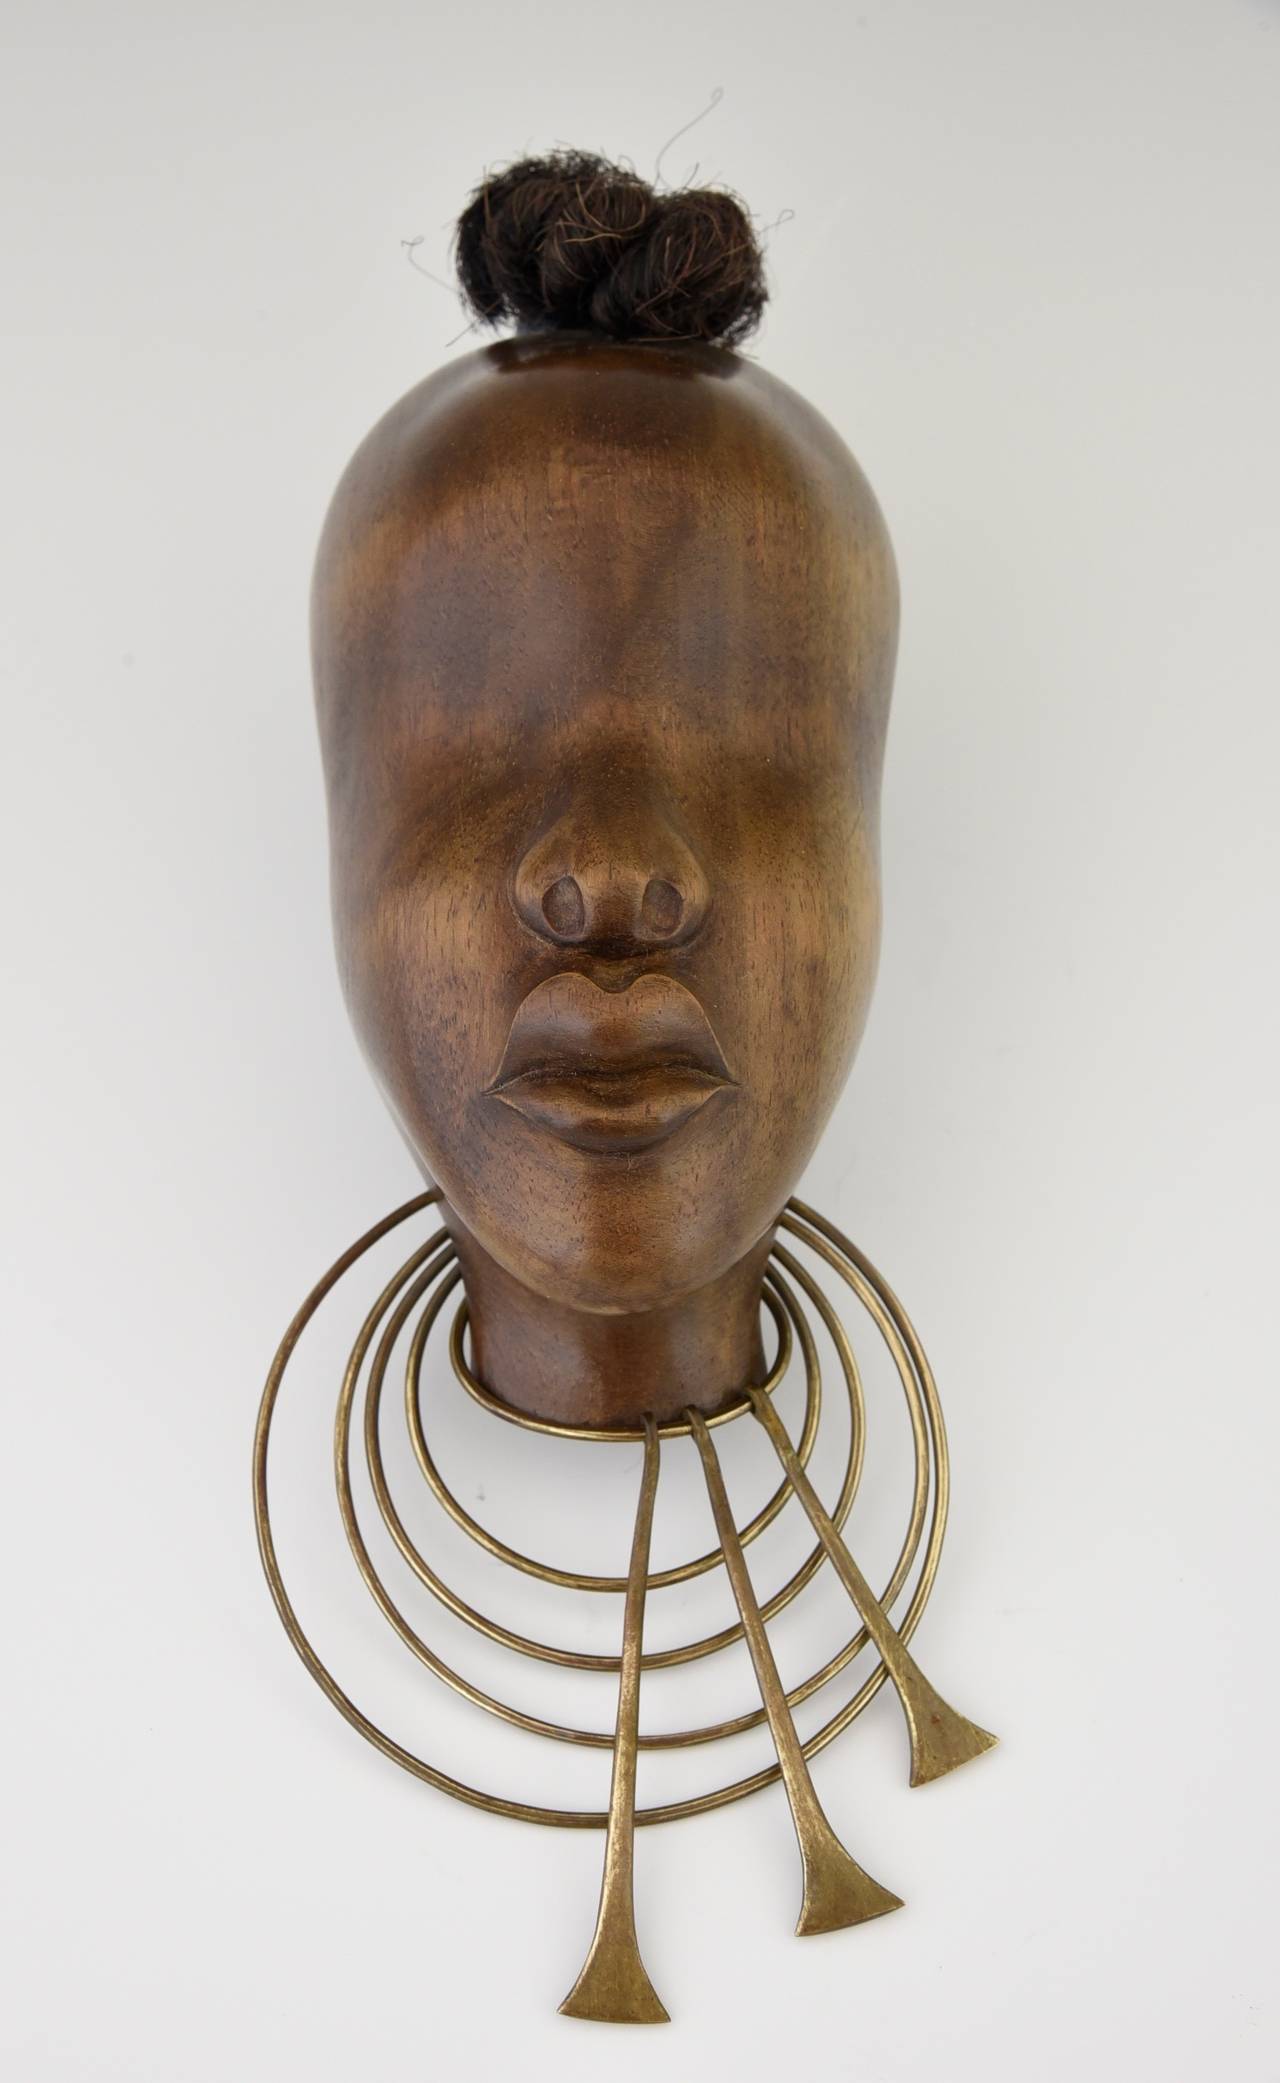 A head of an African women with necklace, wall mask.
By Hagenauer.
Signature or marks: WHW Made in Austria. Hagenauer Wien handmade.
Style: Art Deco.
Date: 1930-1940.
Material: Wood, bronze and horsehair.
Origin: Vienna, Austria.
Condition: